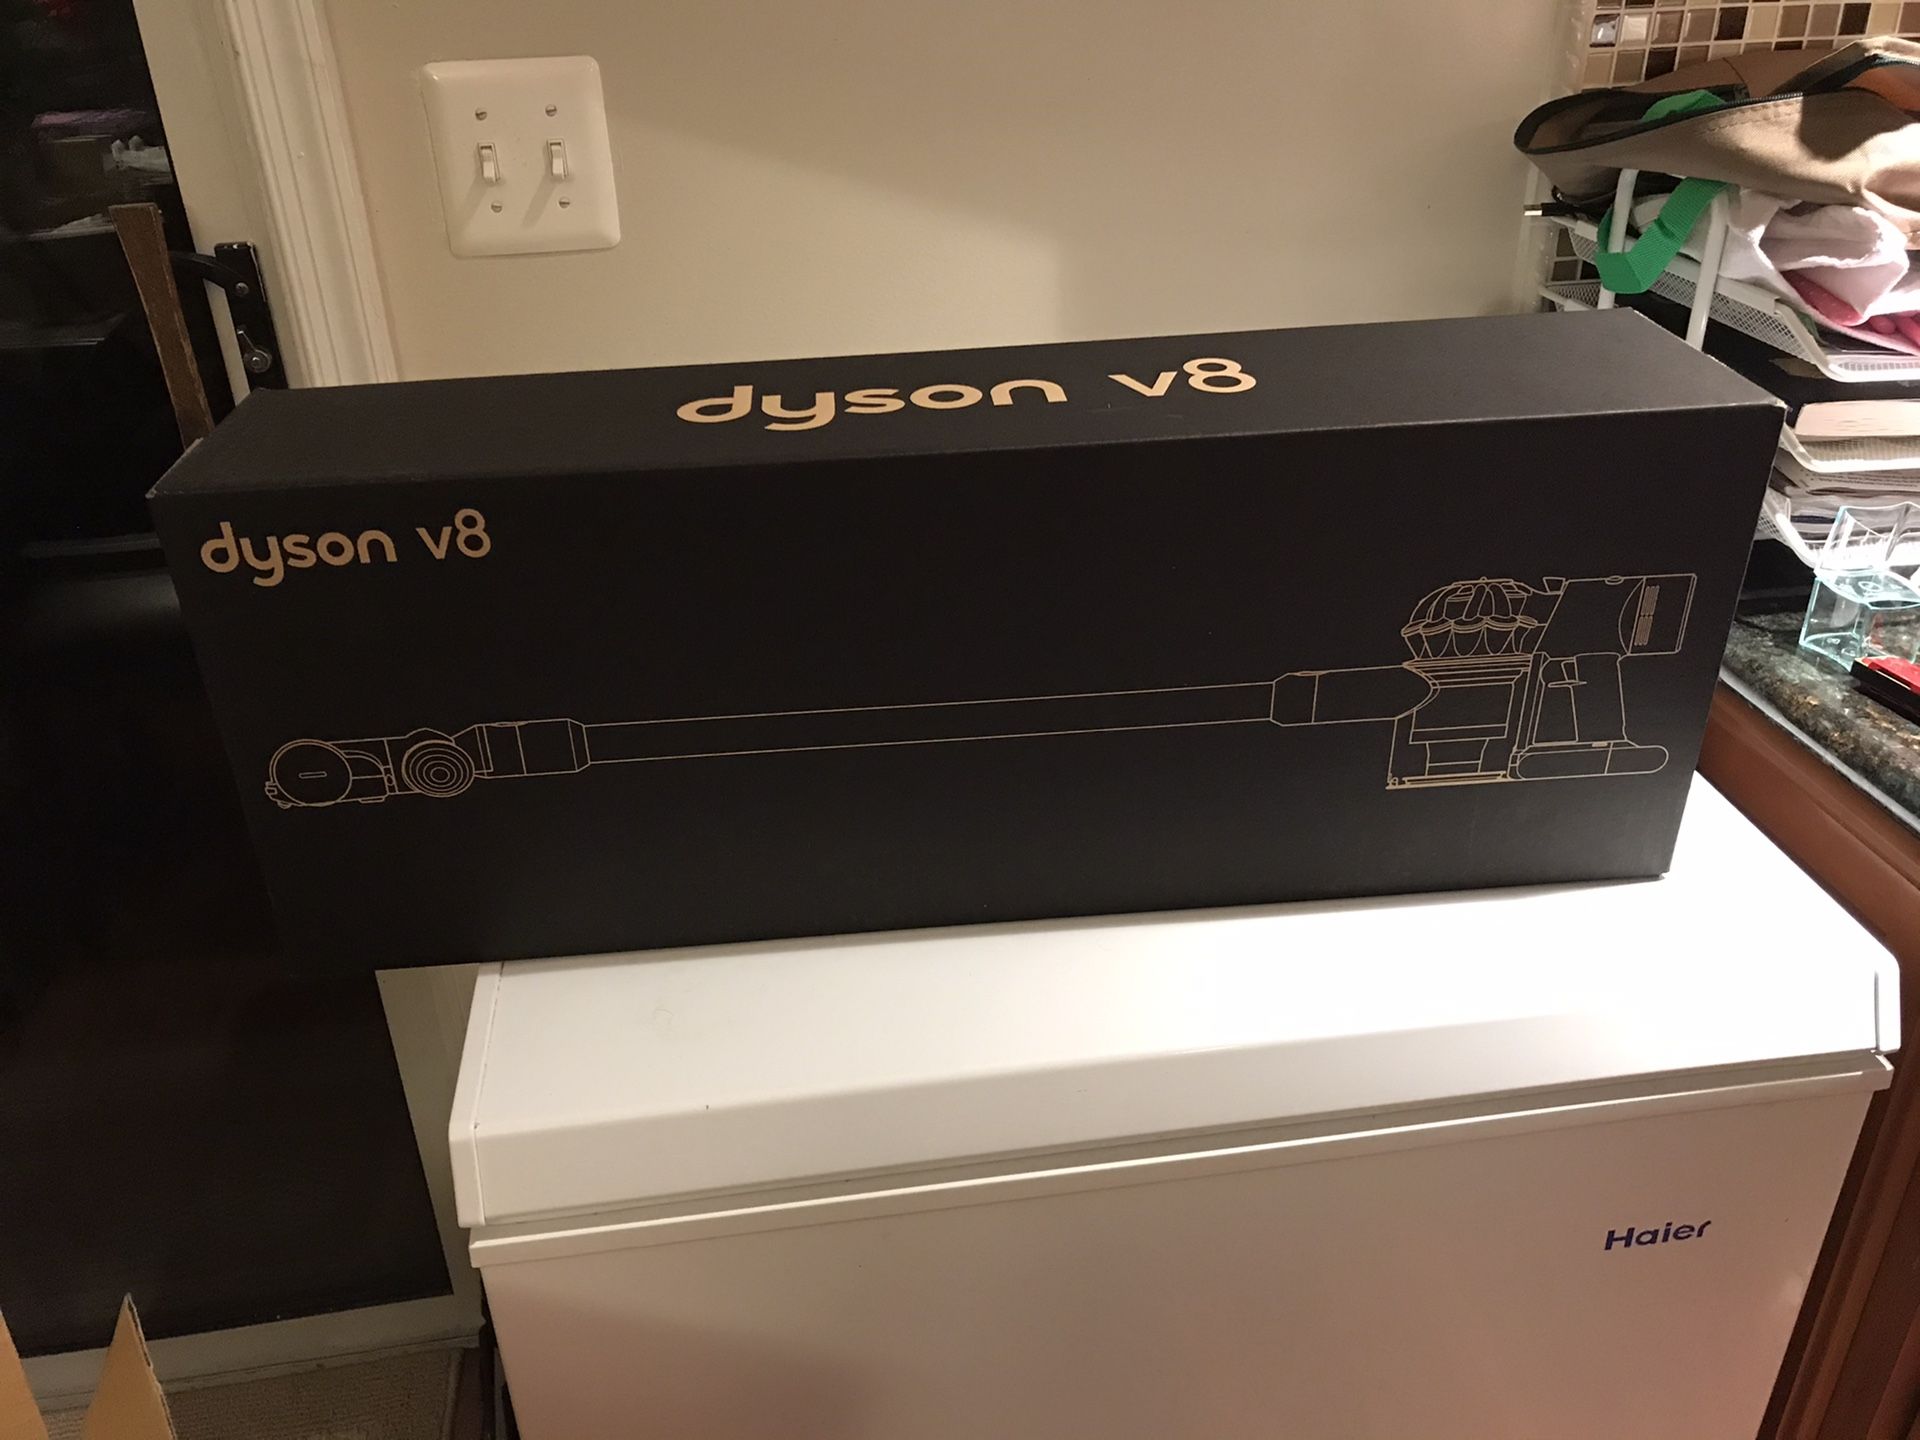 Dyson V8 absolute, unopened box